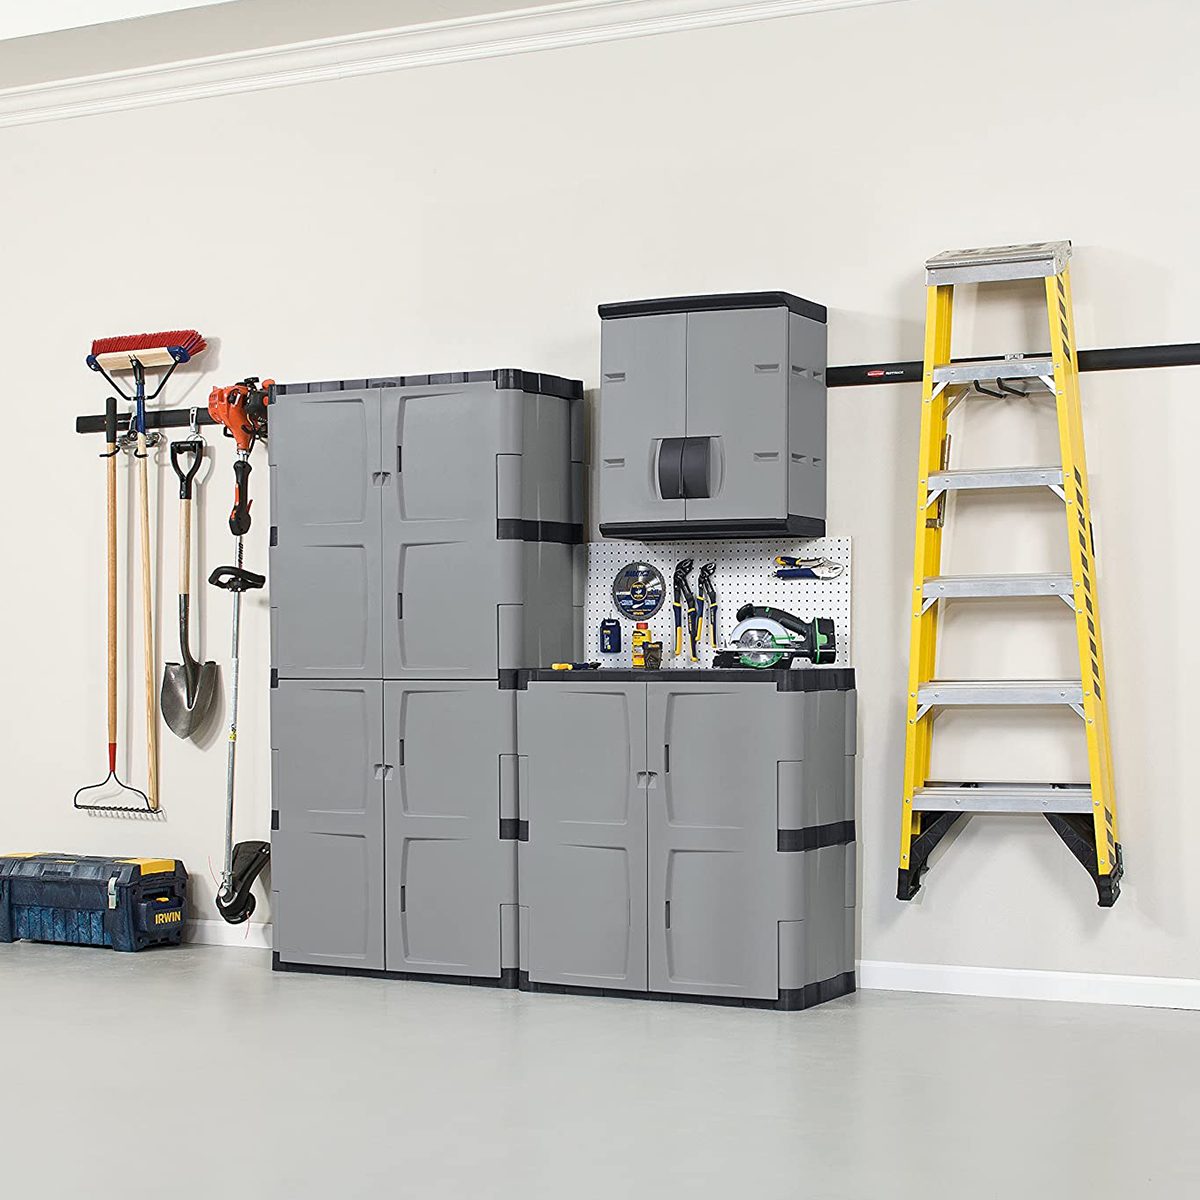 Best Garage Accessories For Organizing All Your Garage Tools